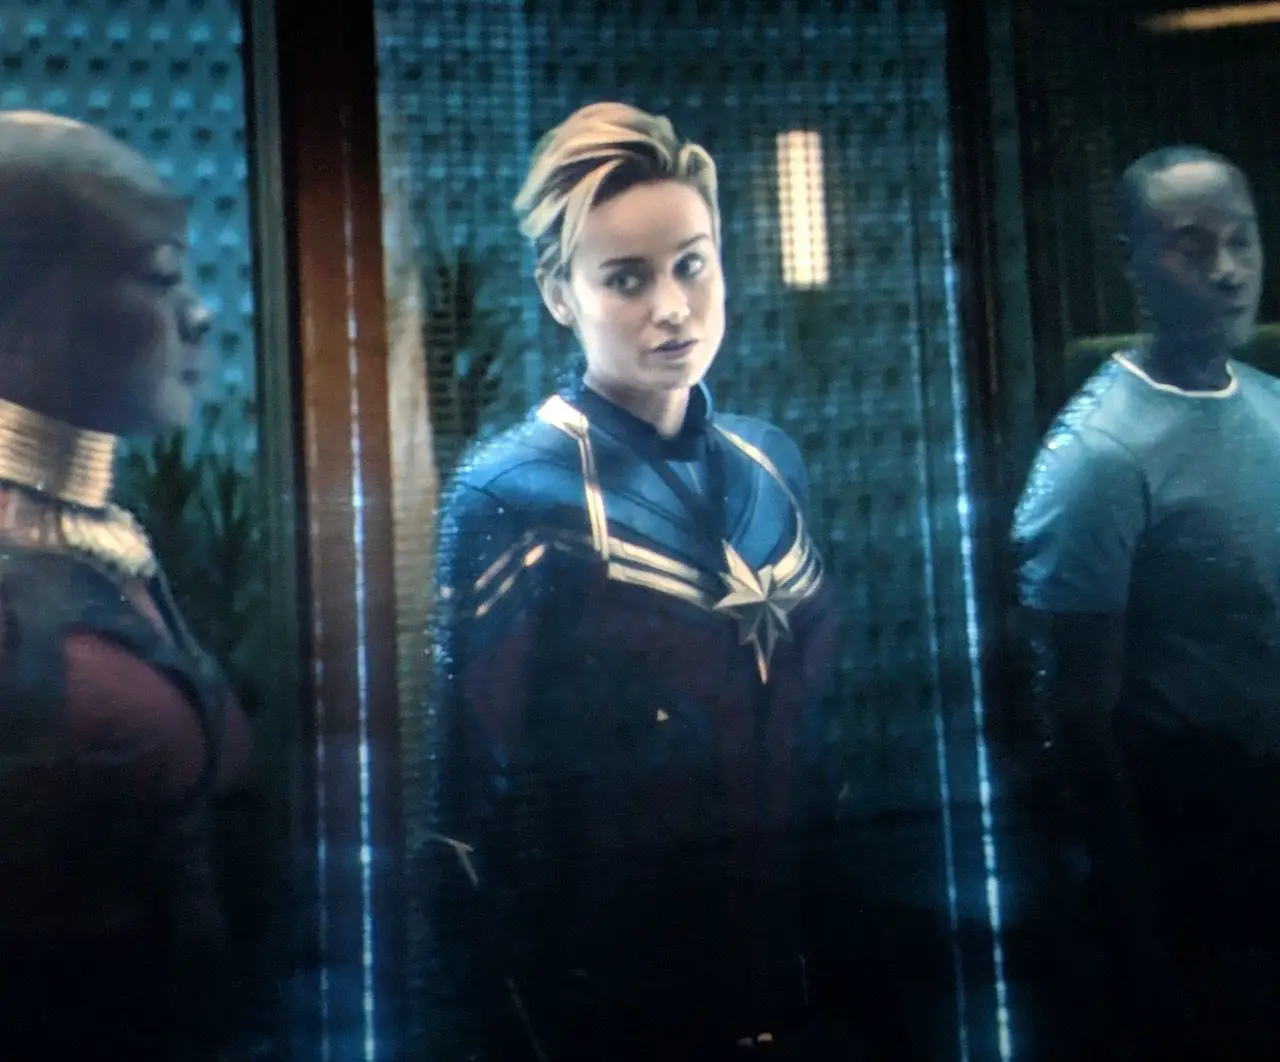 Captain Marvel on holo screen in Endgame Shang-Chi mid-credits